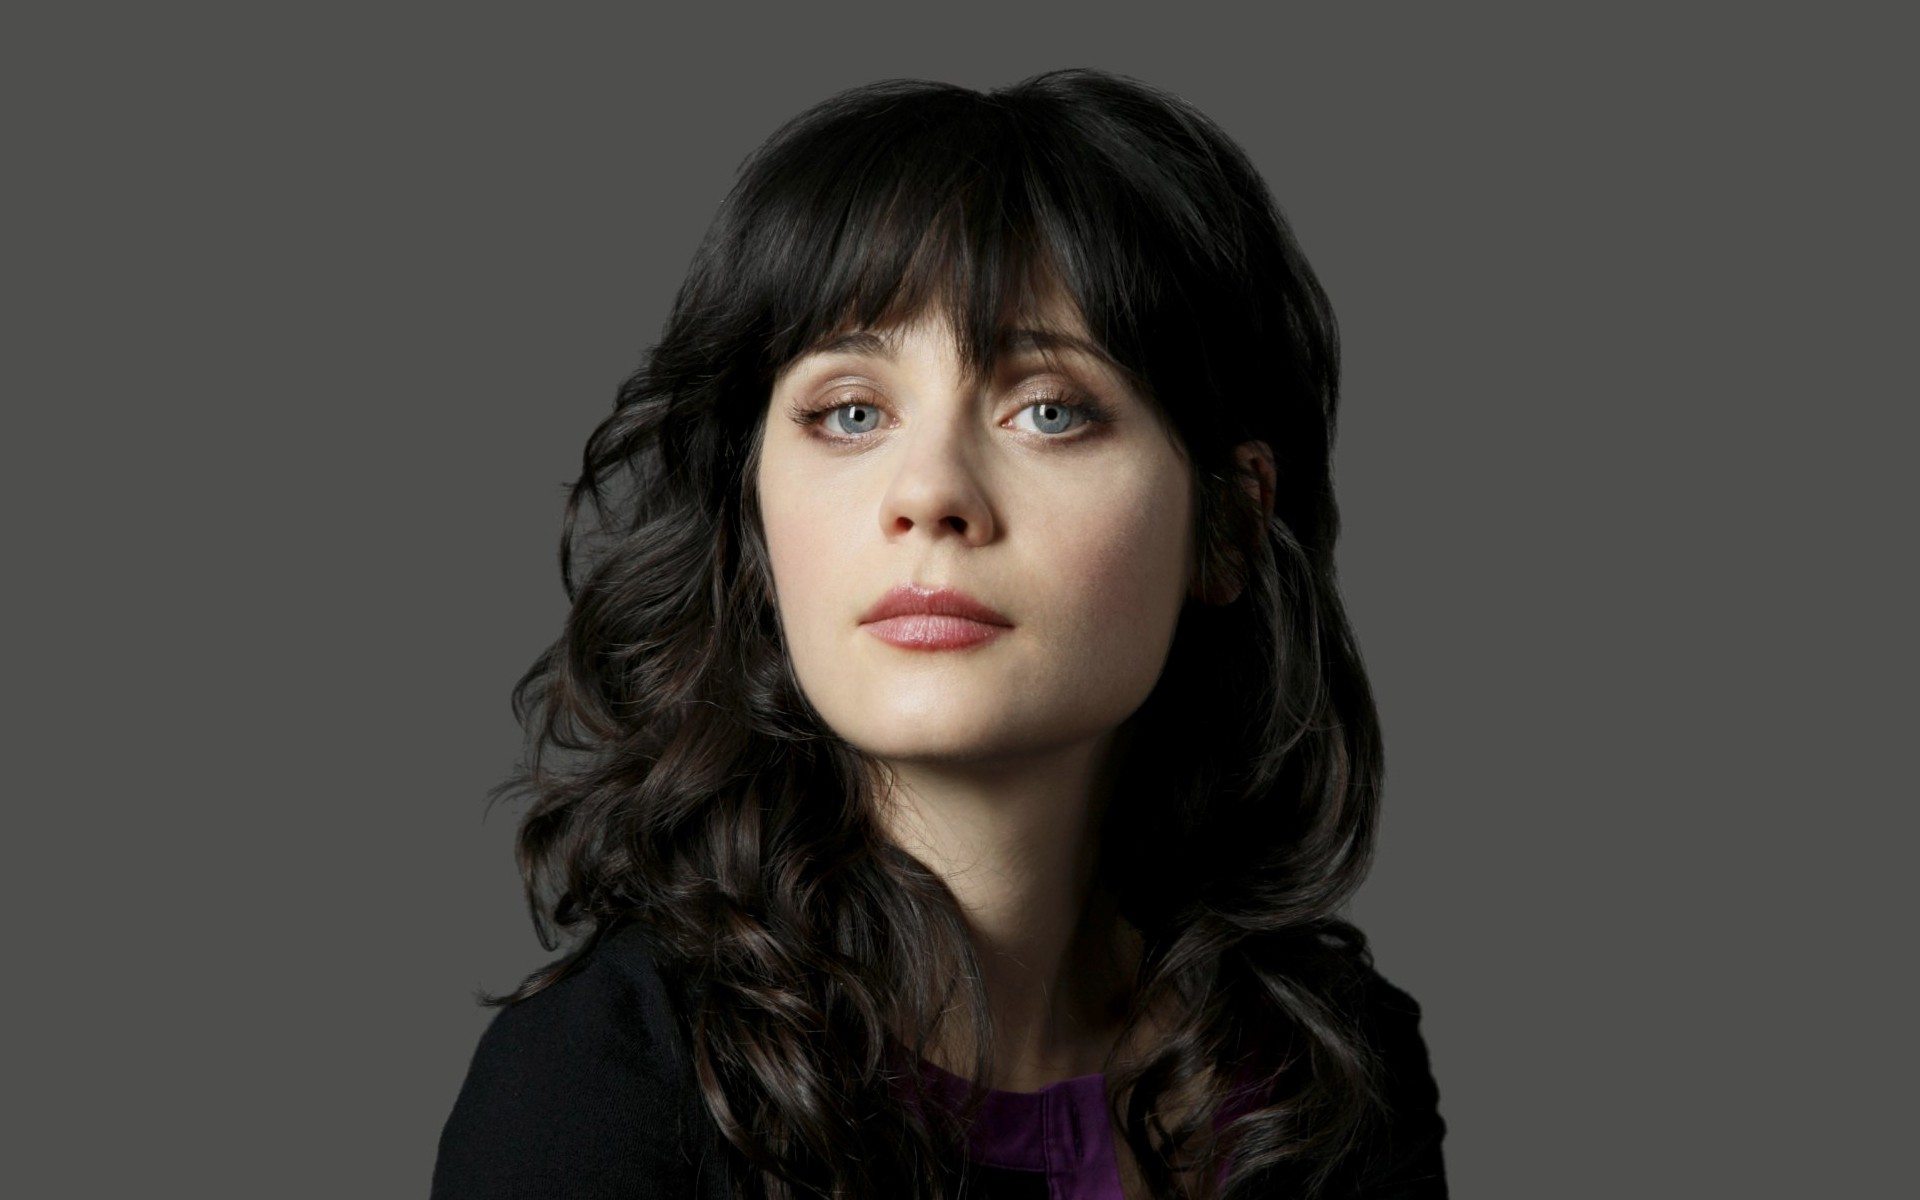 8. "The Most Gorgeous Dark Haired and Blue Eyed Actresses on IMDb" - wide 7